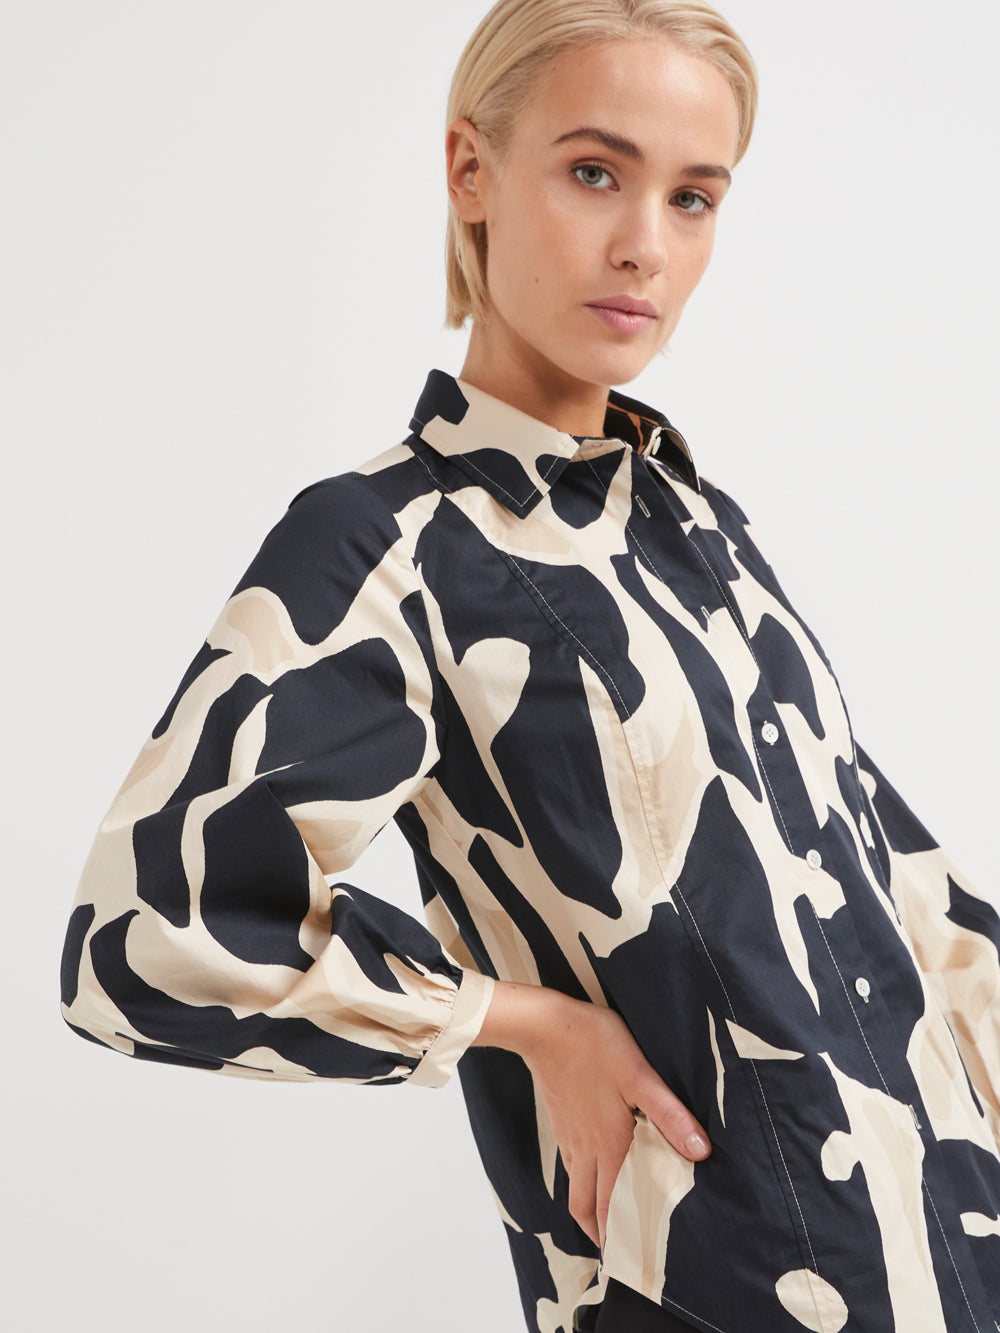 The Cotton Abstract Button Up Shirt